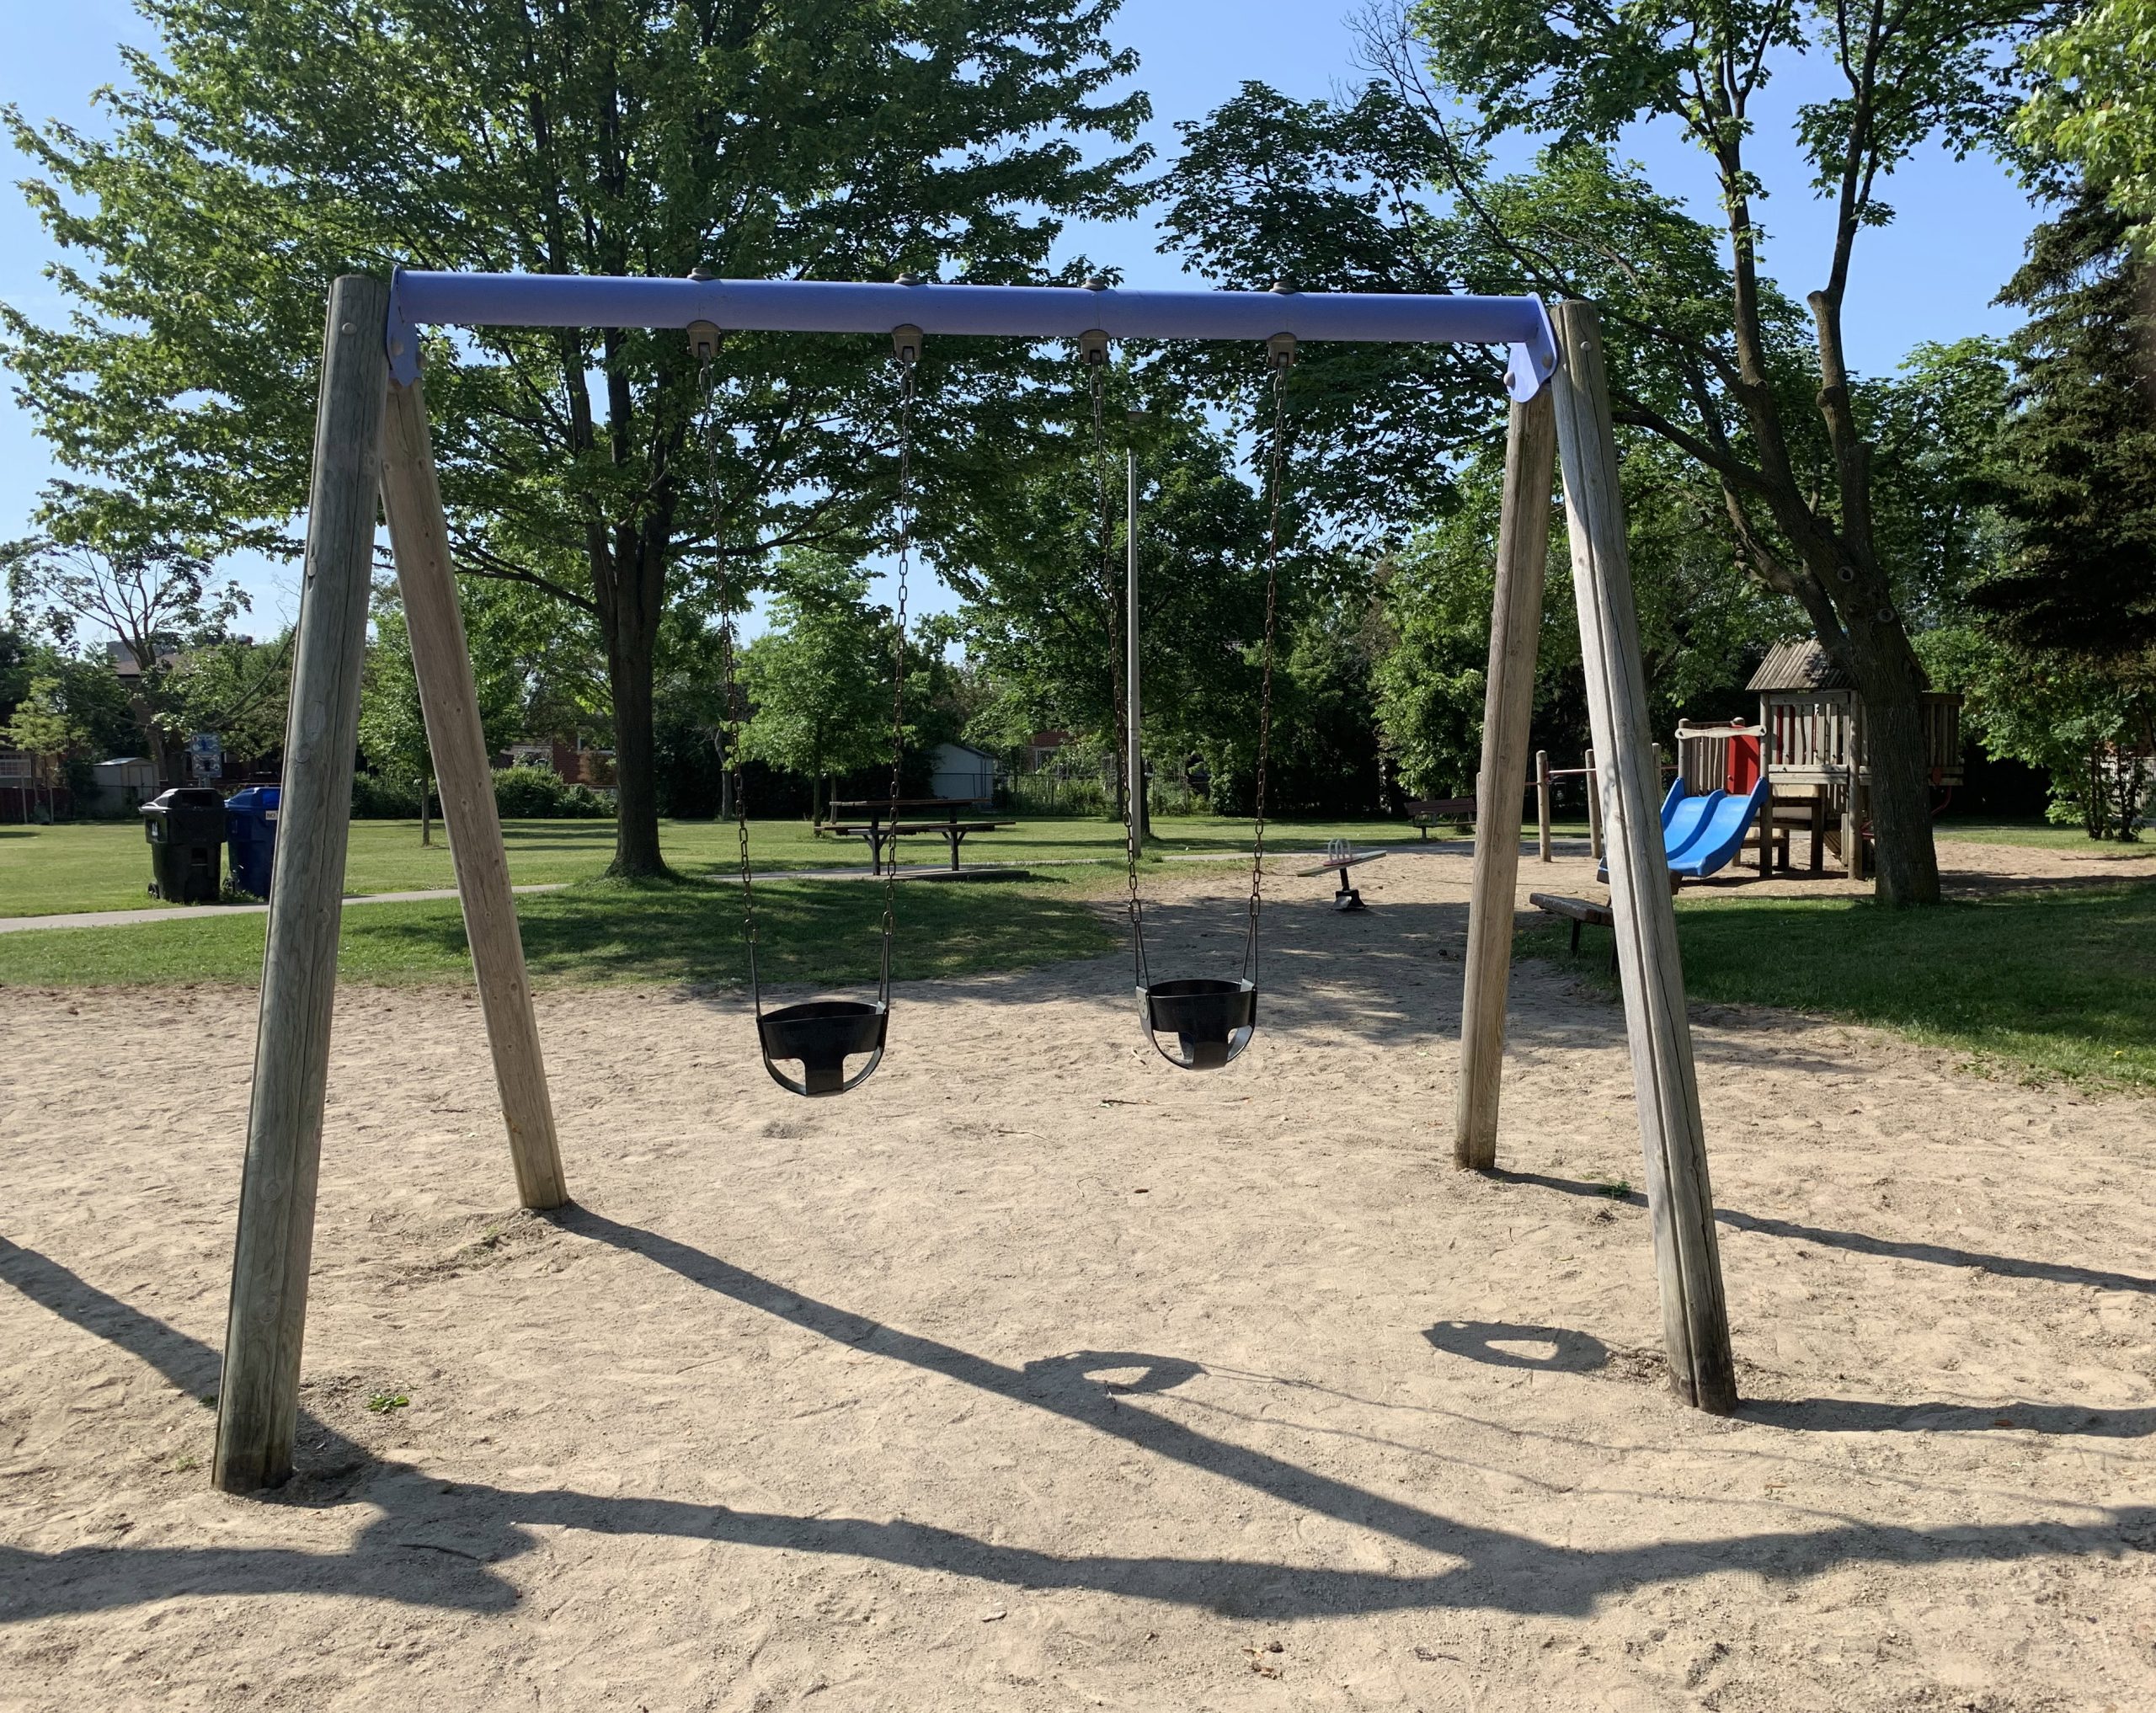 Clydesdale Park Playground before construction looking south. A wood swing set is in the foreground surrounded by sand surfacing and trees.